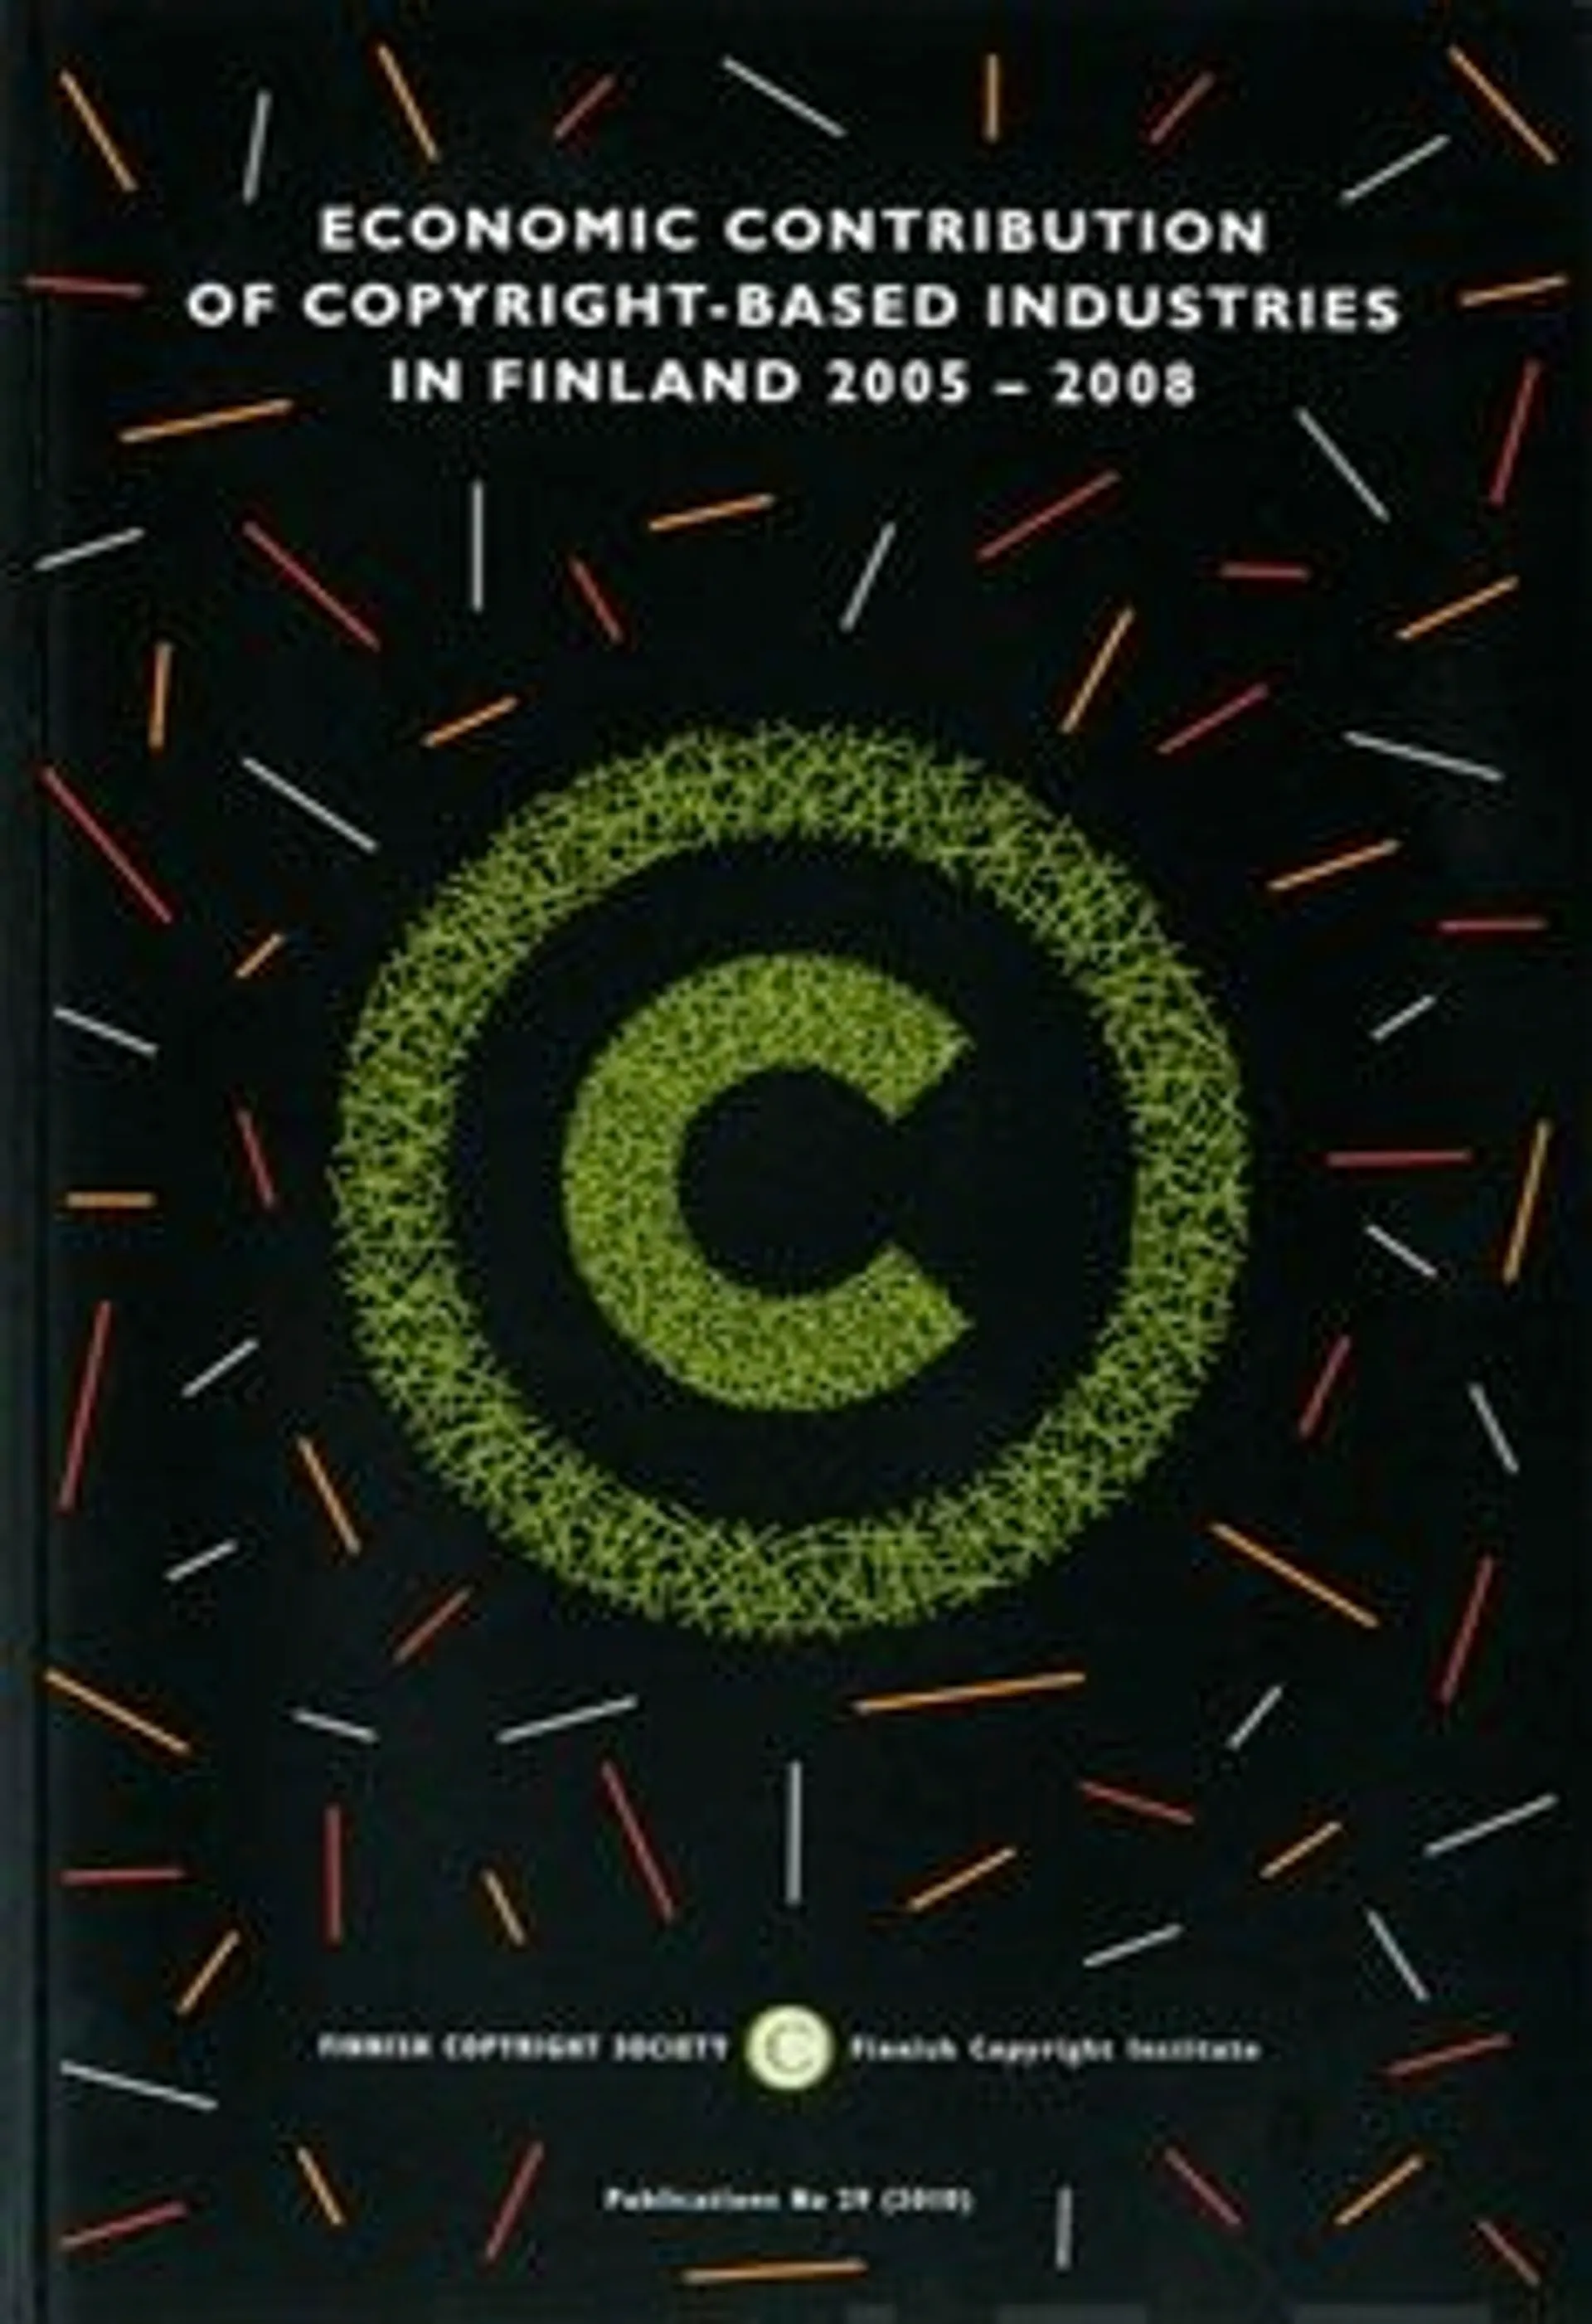 Economic contribution of copyright-based industries in Finland 2005-2008